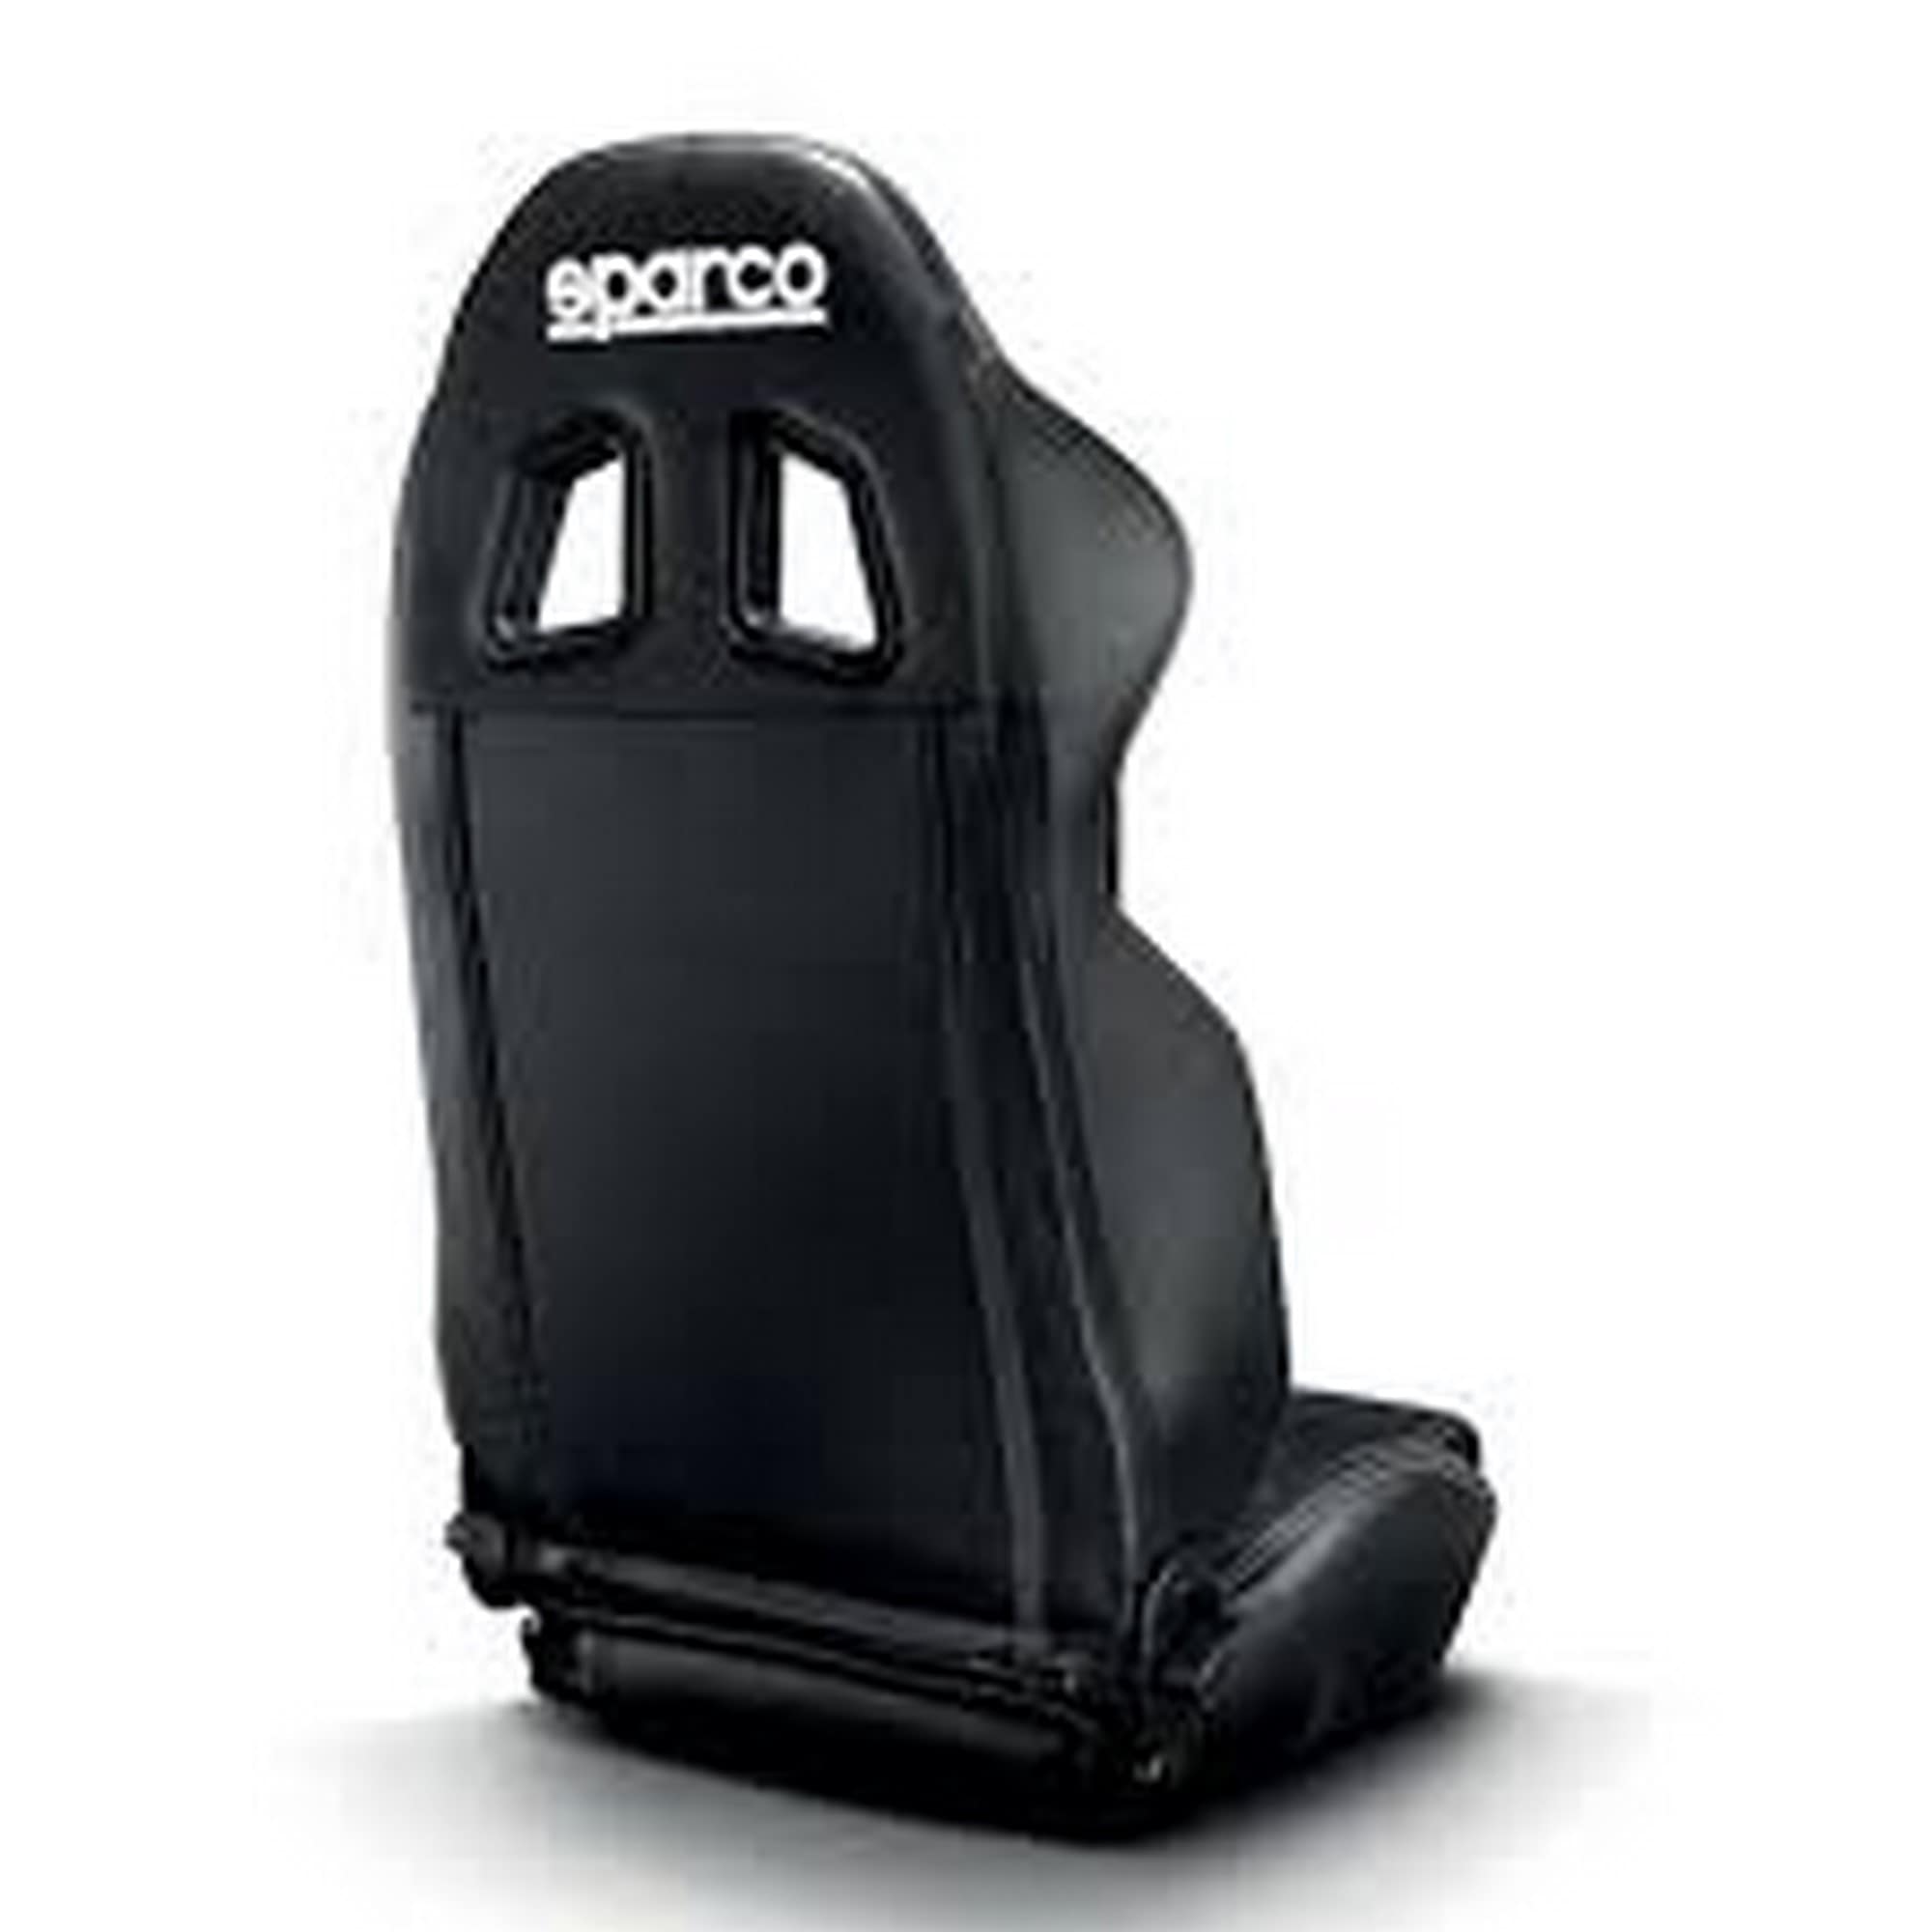 Car Seat Sparco Martini Racing Edition R100